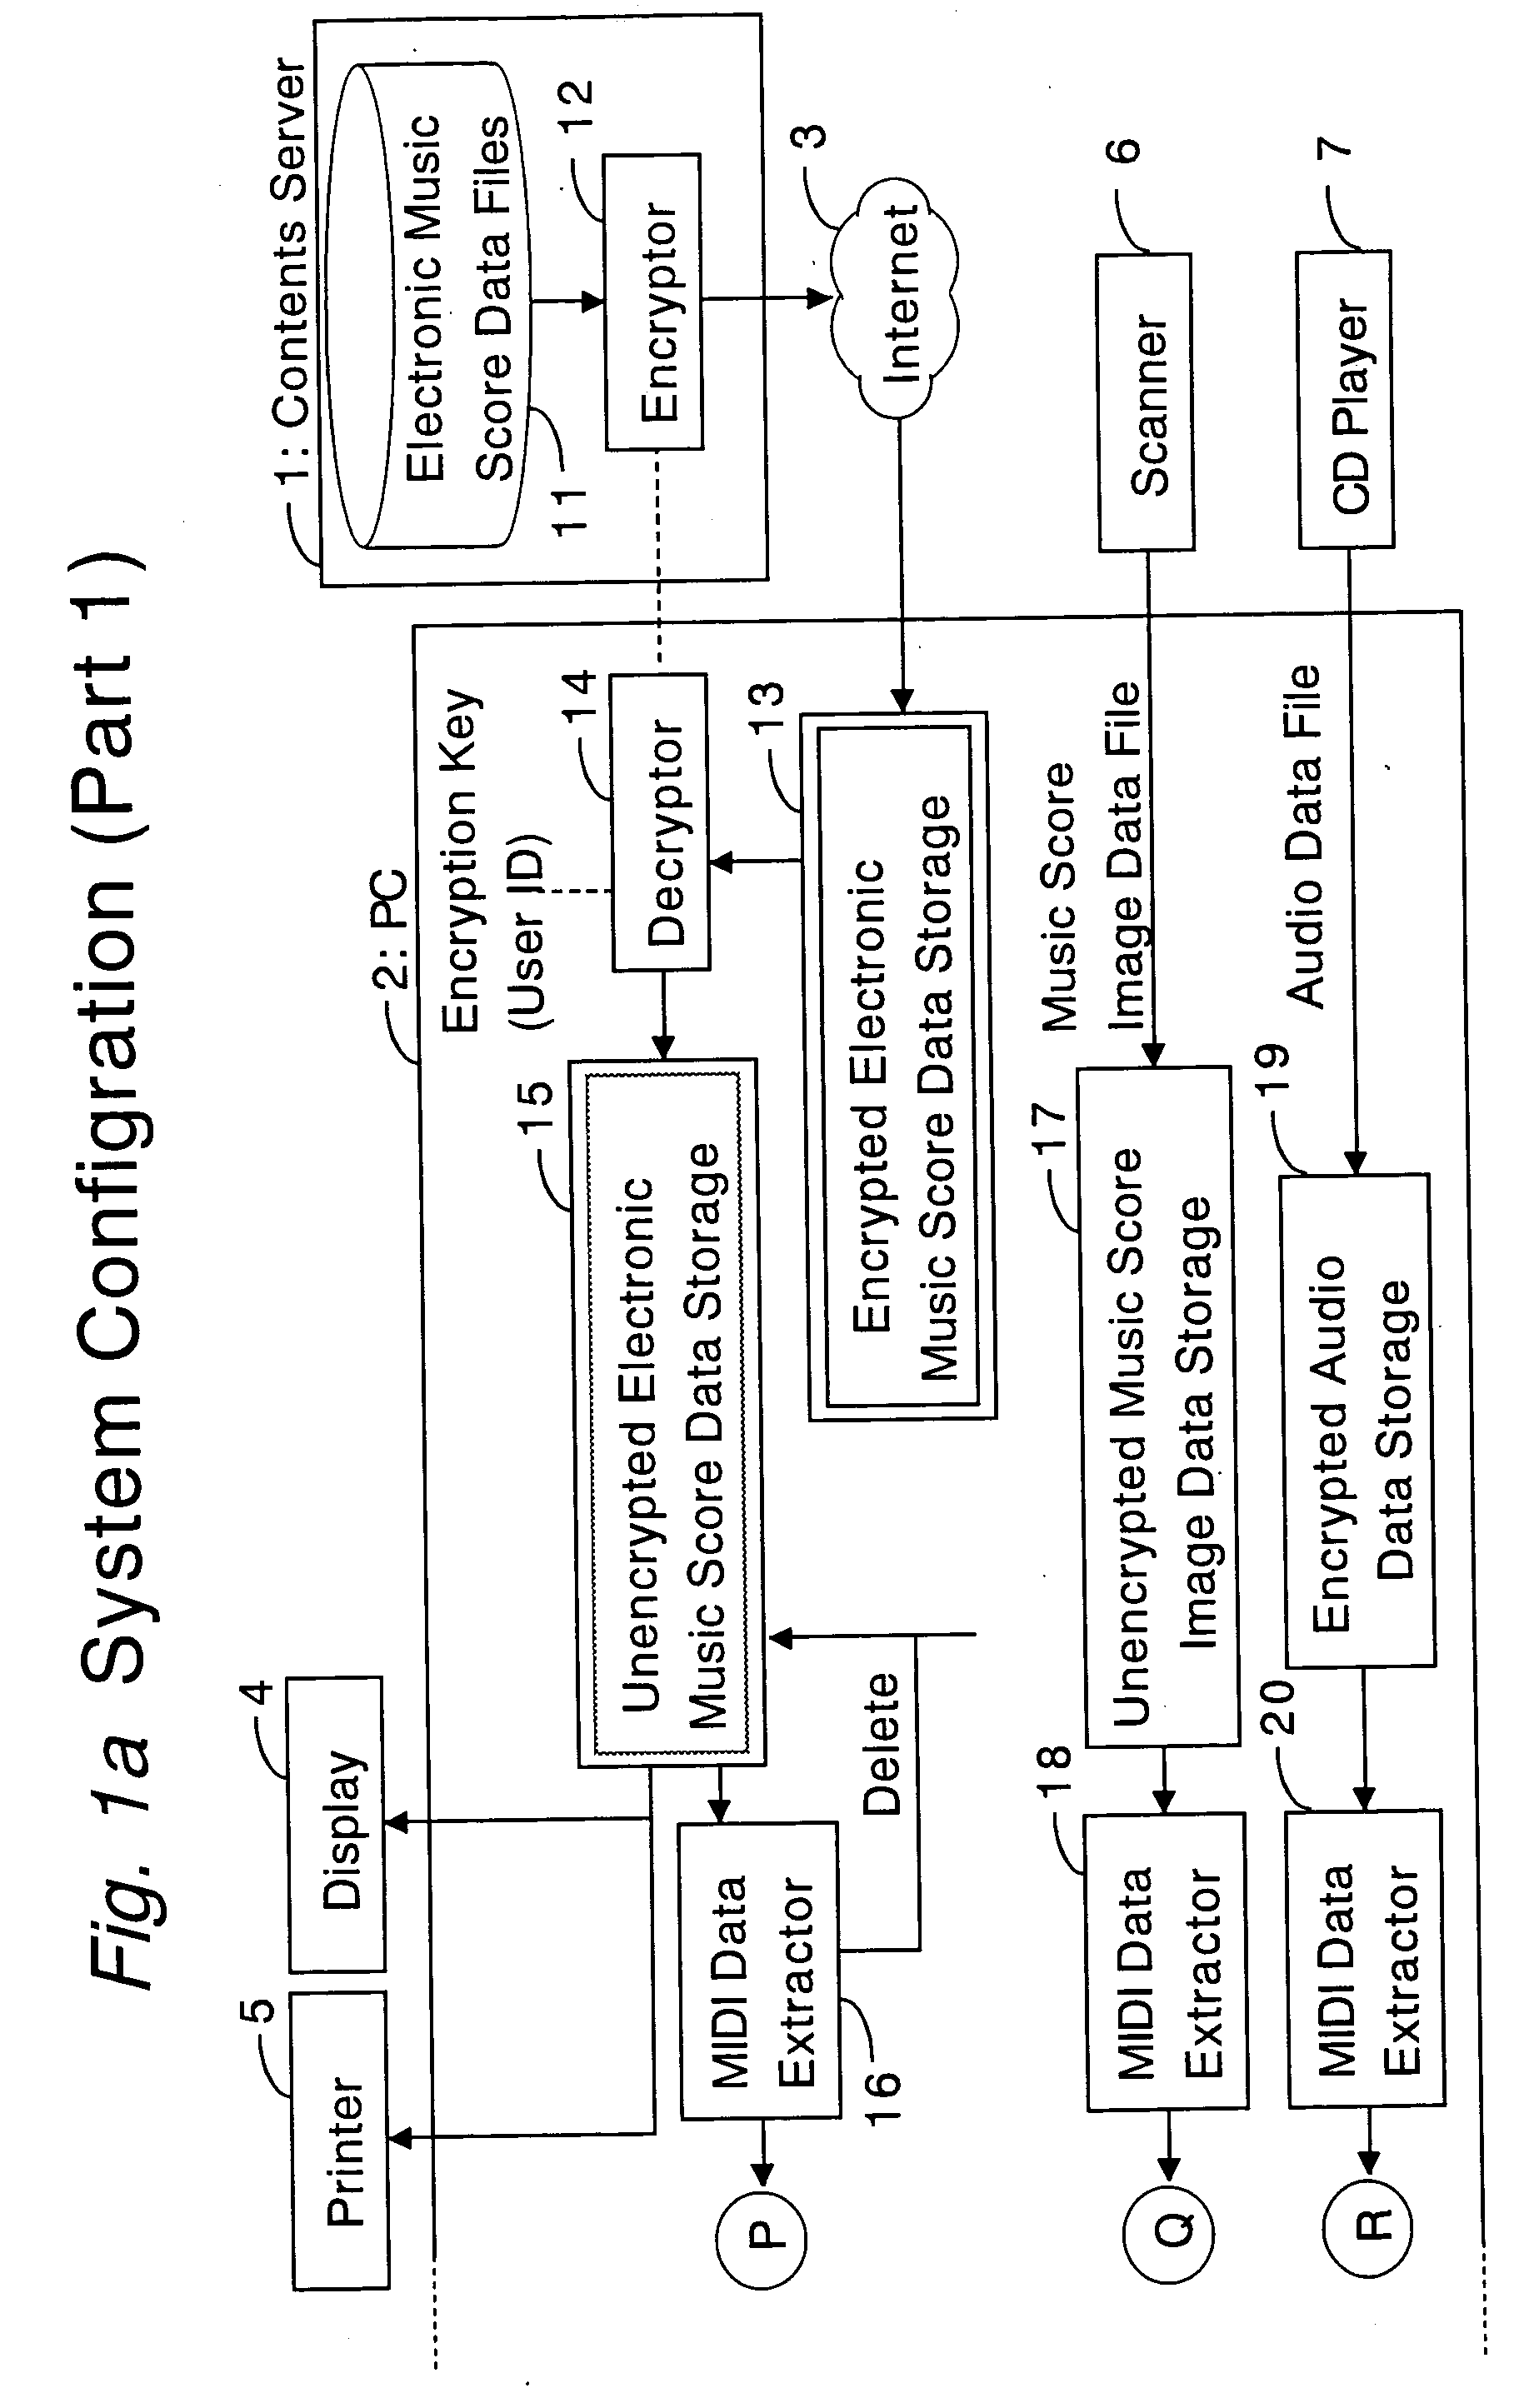 System, method and computer program for ensuring secure use of music playing data files